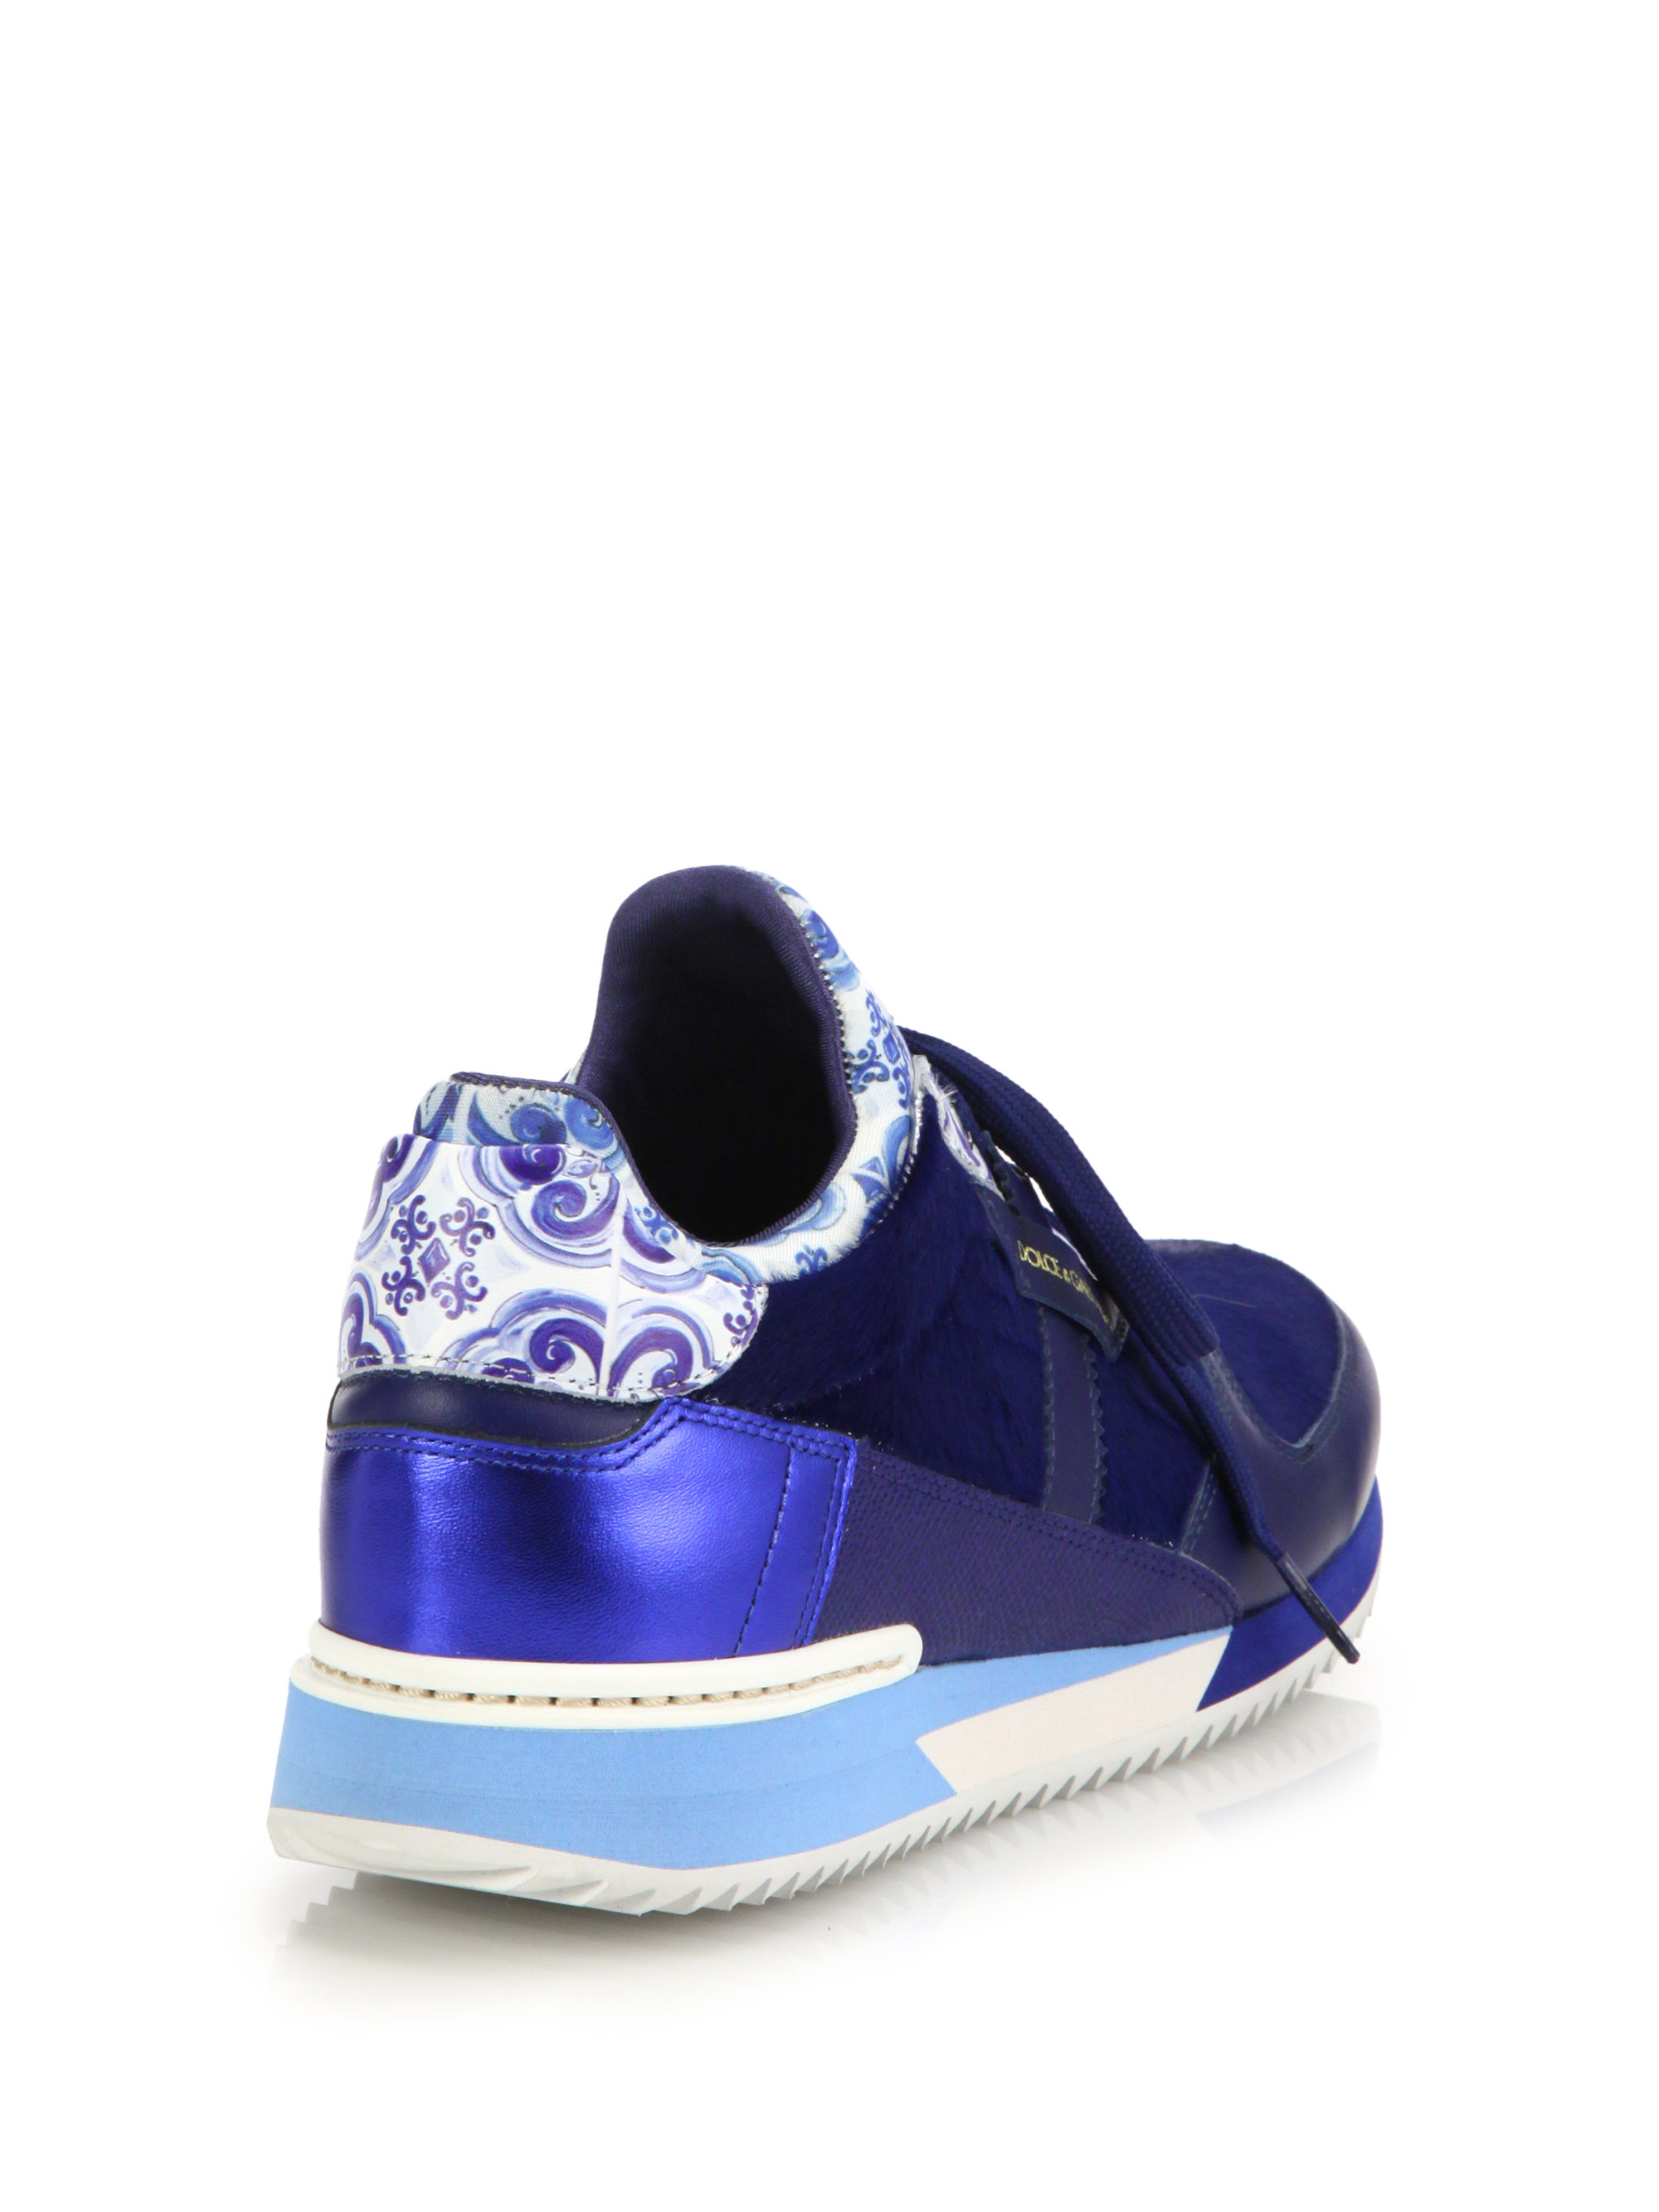 Lyst - Dolce & Gabbana Tile-Print Leather & Calf Hair Sneakers in Blue